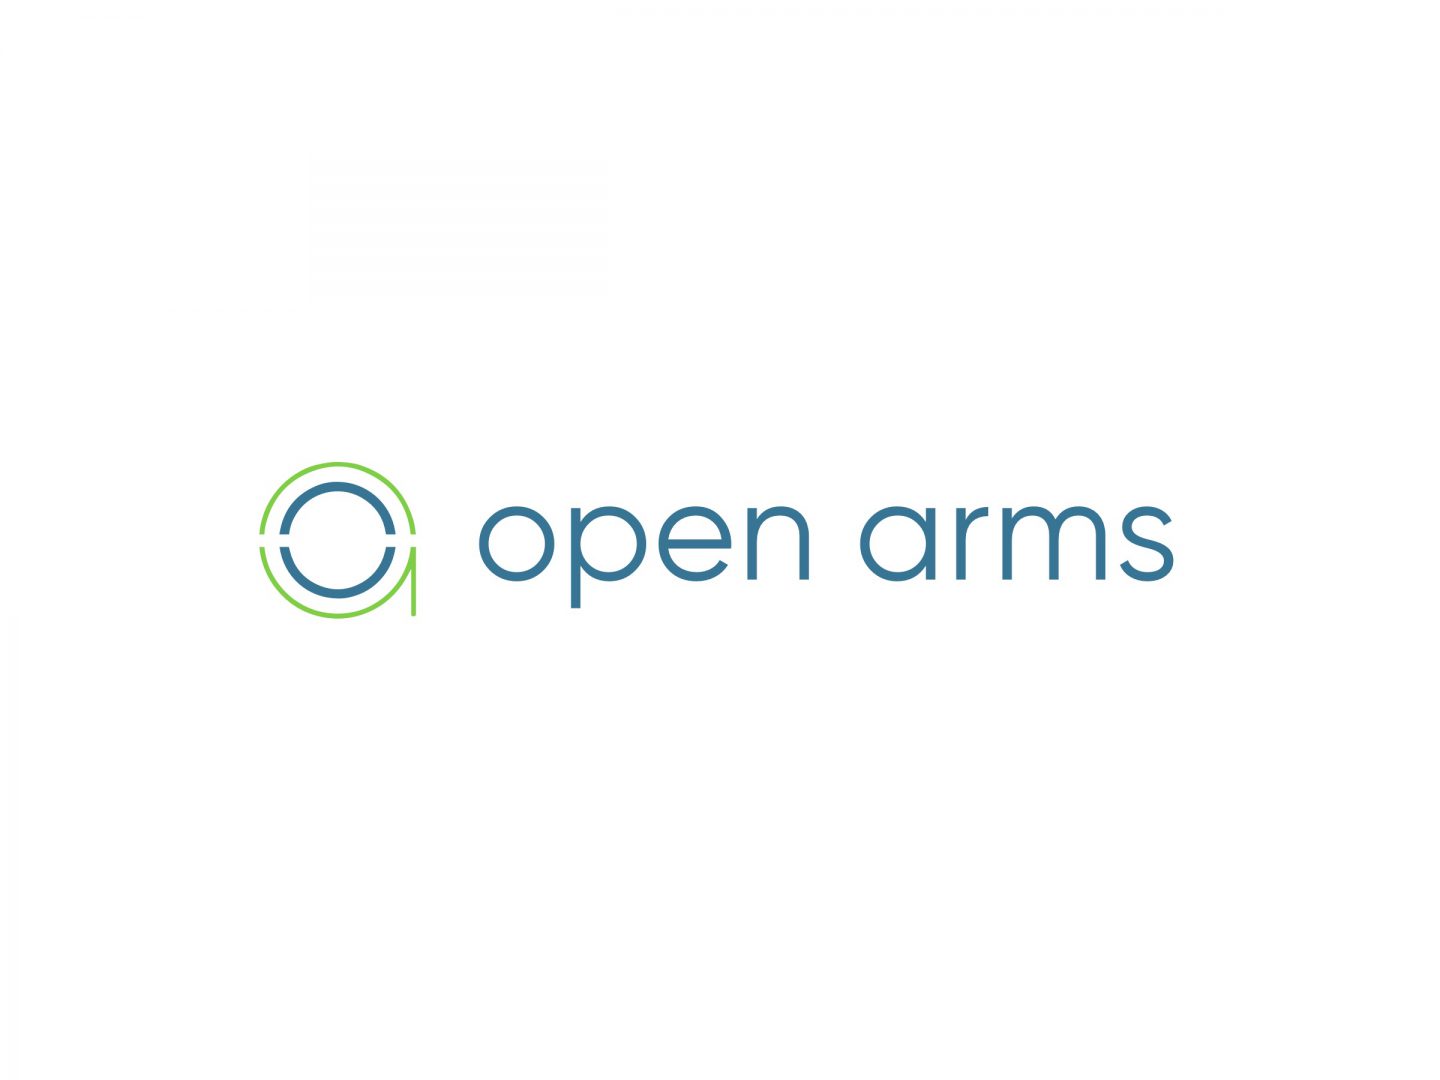 New logo mockup for Open Arms Ministry